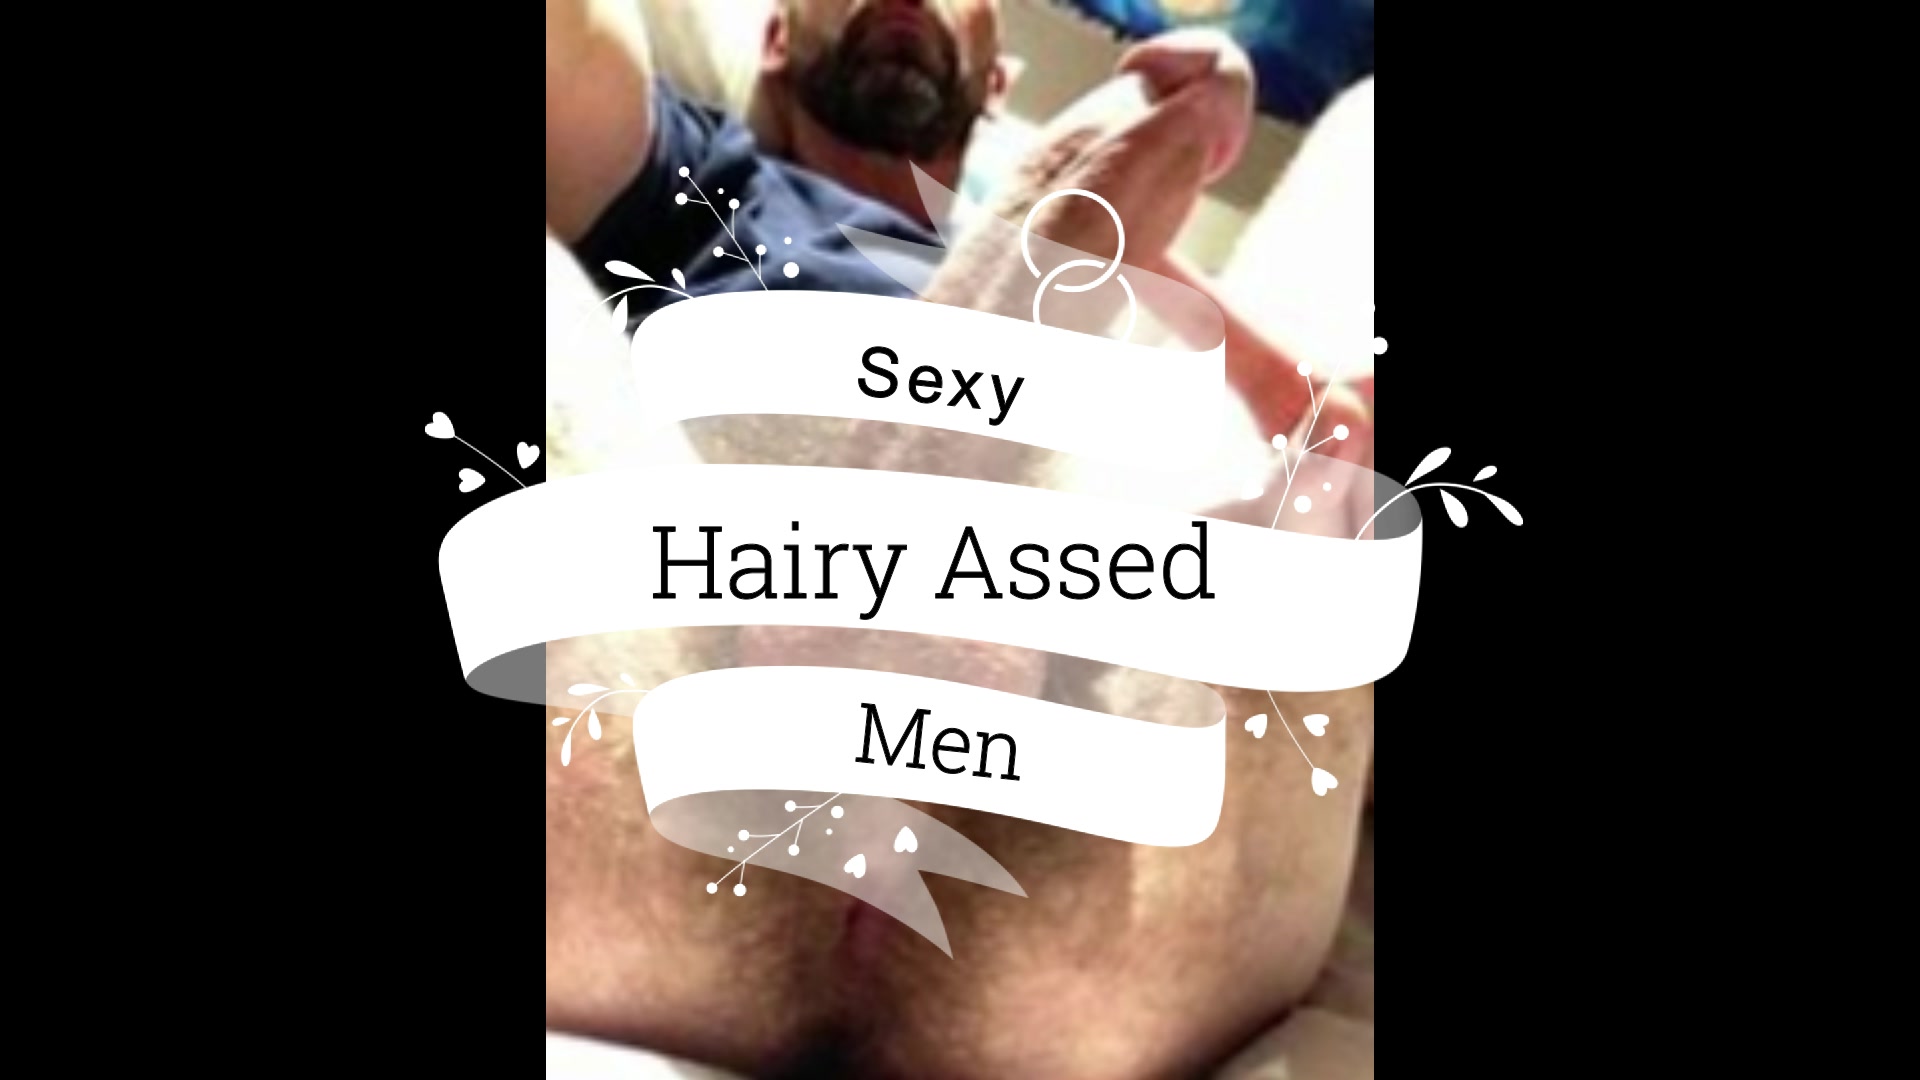 Sexy hairy assed men photos